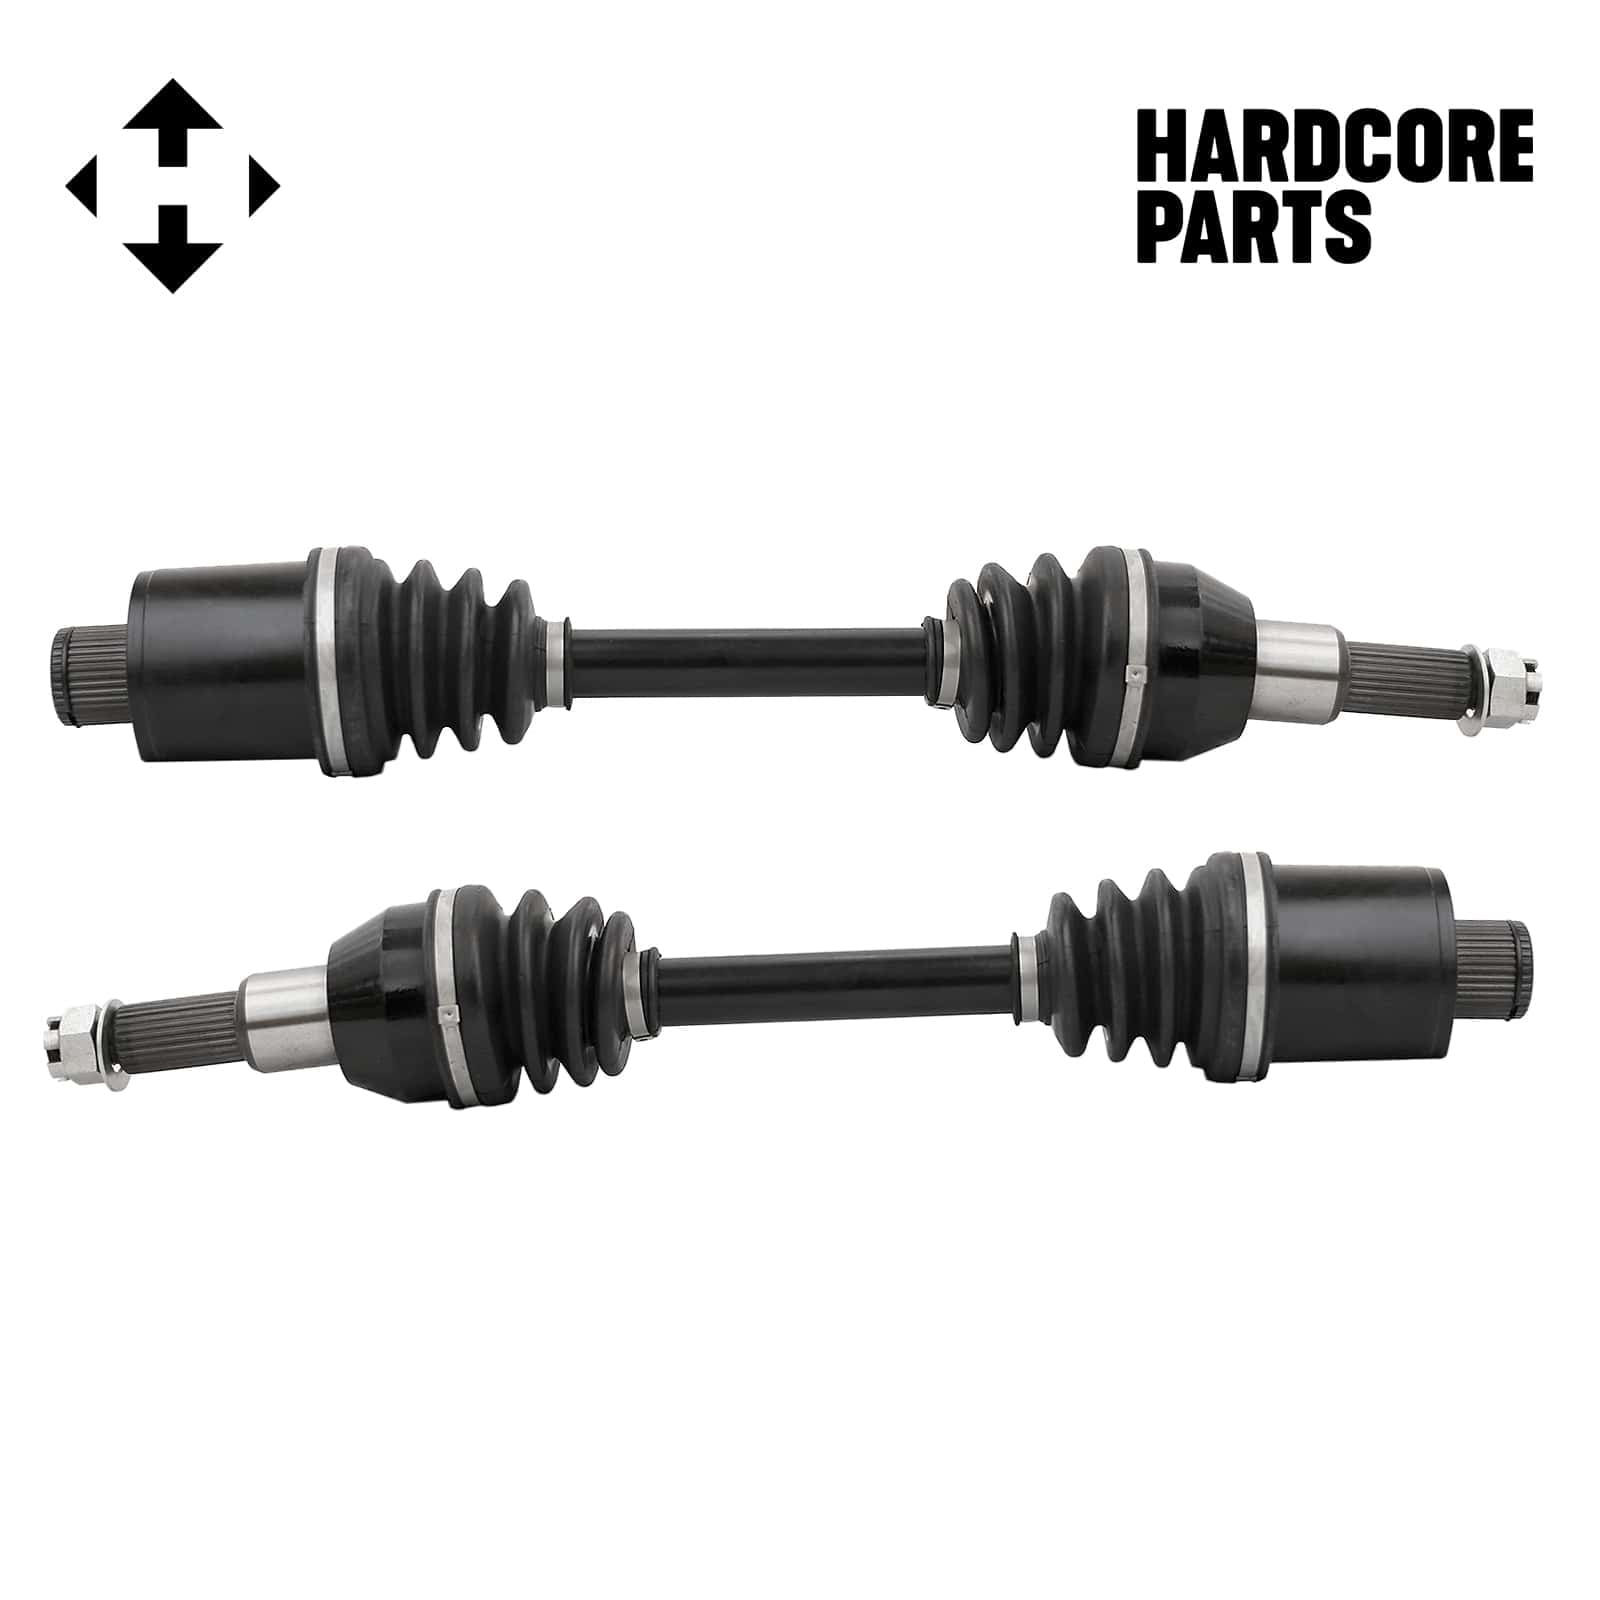 Rear Inner or Outer CV Axle Boot Kit fits Polaris Sportsman 1999 335 2001-05 400